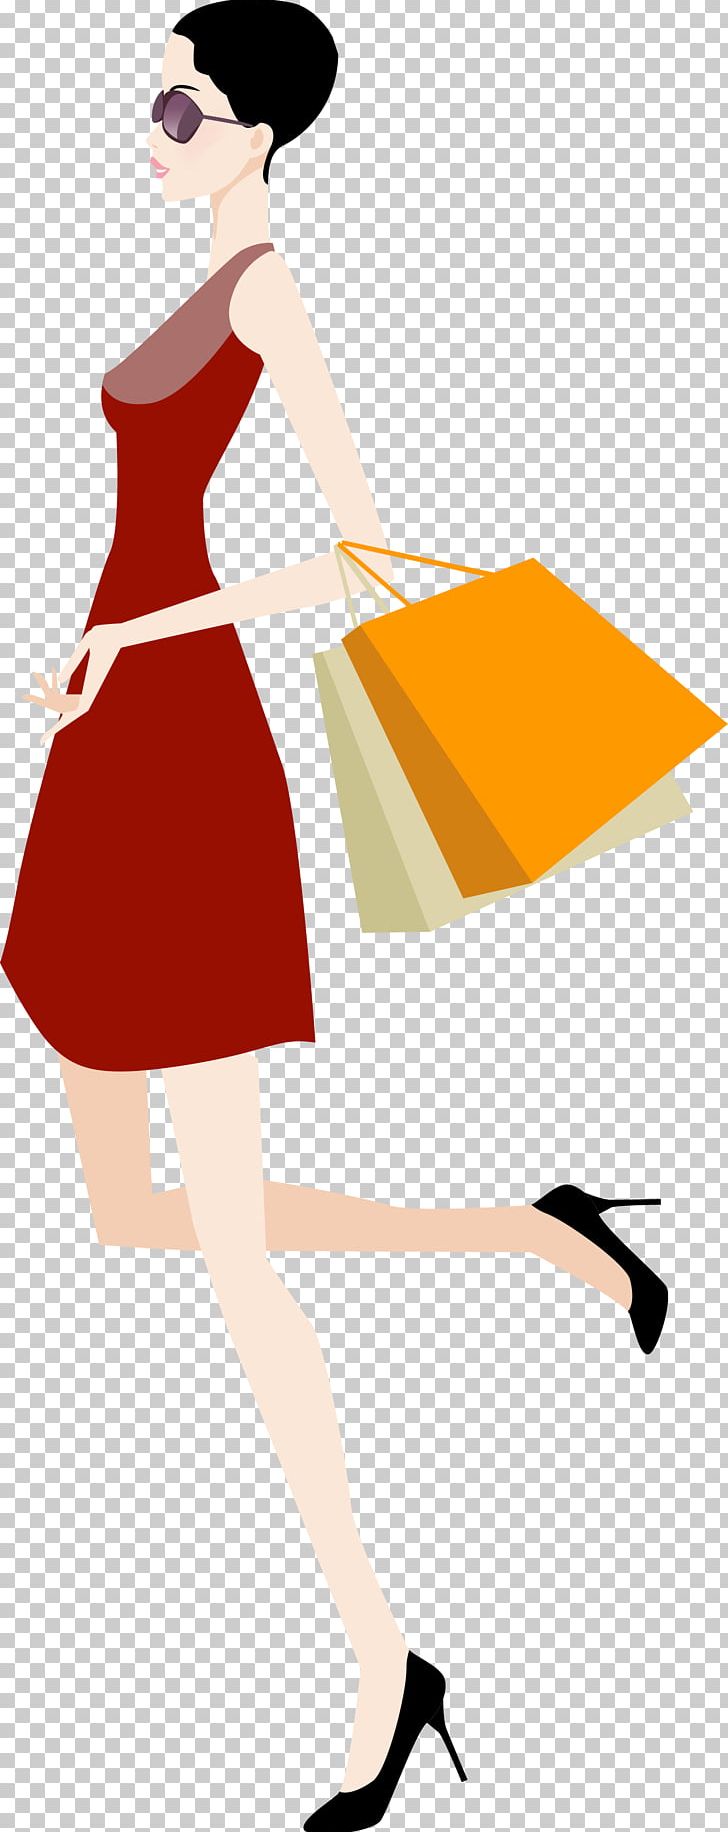 Fashion Stock Illustration Woman PNG, Clipart, Bags, Bag Vector, Business Woman, Cartoon, Cartoon Characters Free PNG Download